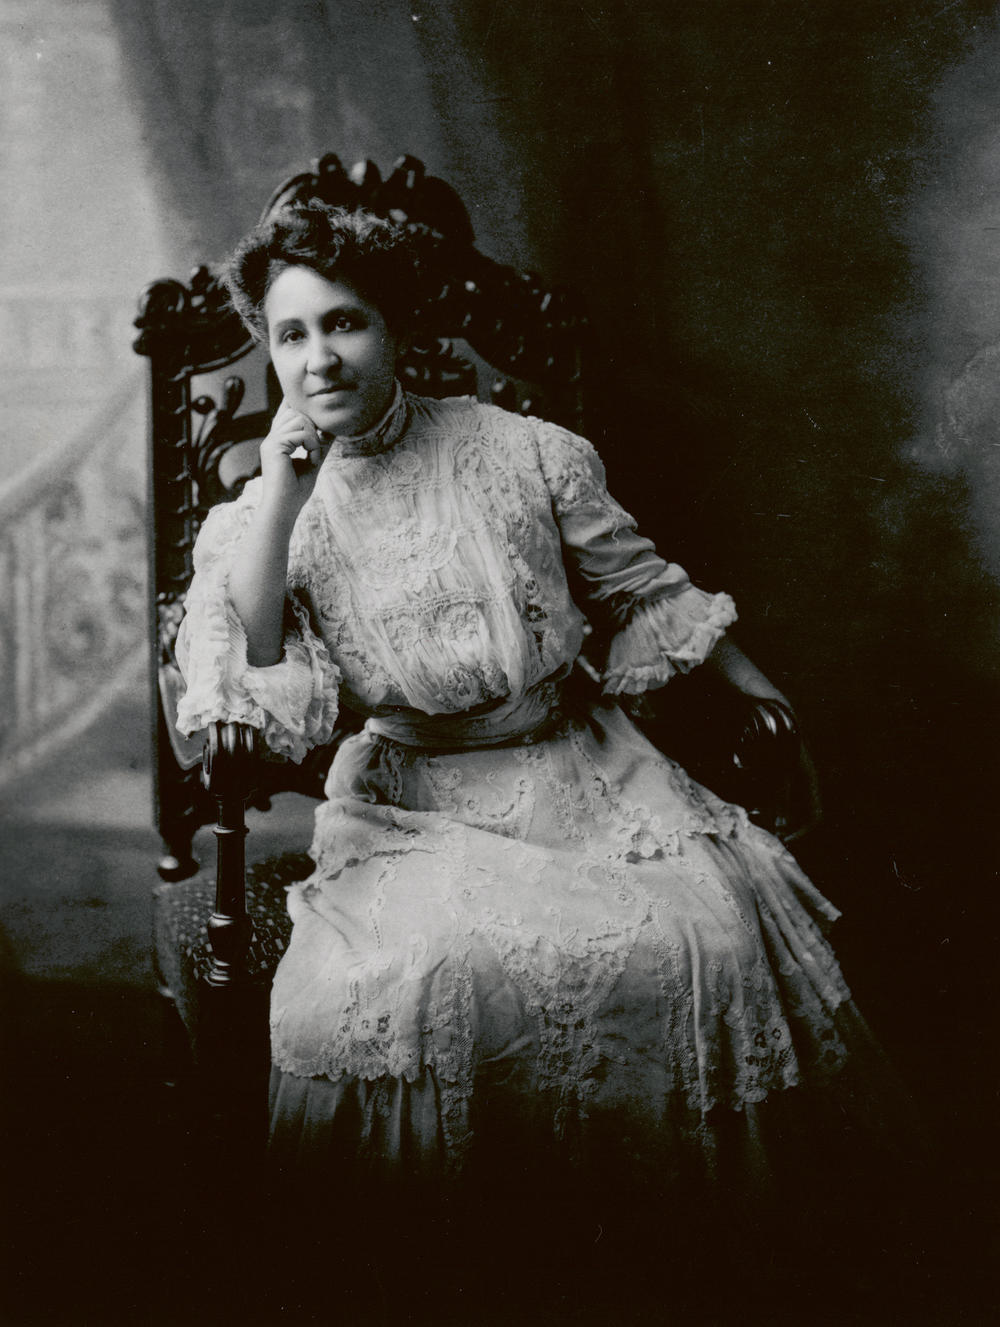 African American suffragist and activist Mary Church Terrell.